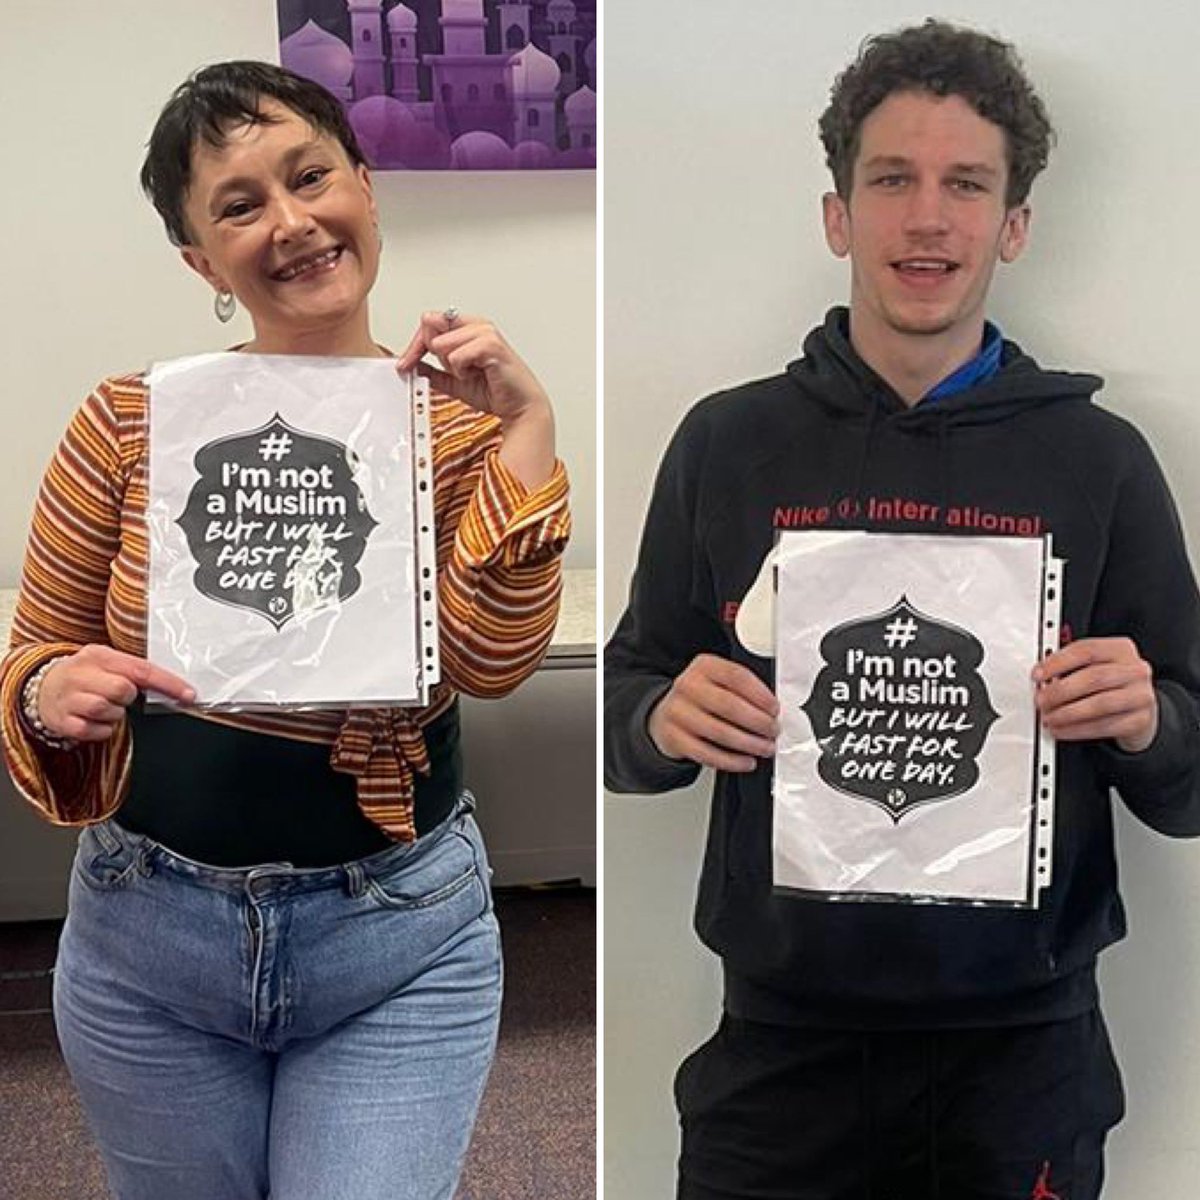 Rowena and Josh BT Telephone Exchange are taking part in our #imnotamuslimbutiwillfastforoneday campaign.
Rowena states “I wanted to take part and support my colleagues and friends. 
It’s a great incentive to learn and support multidisciplinary and multicultural experiences.”